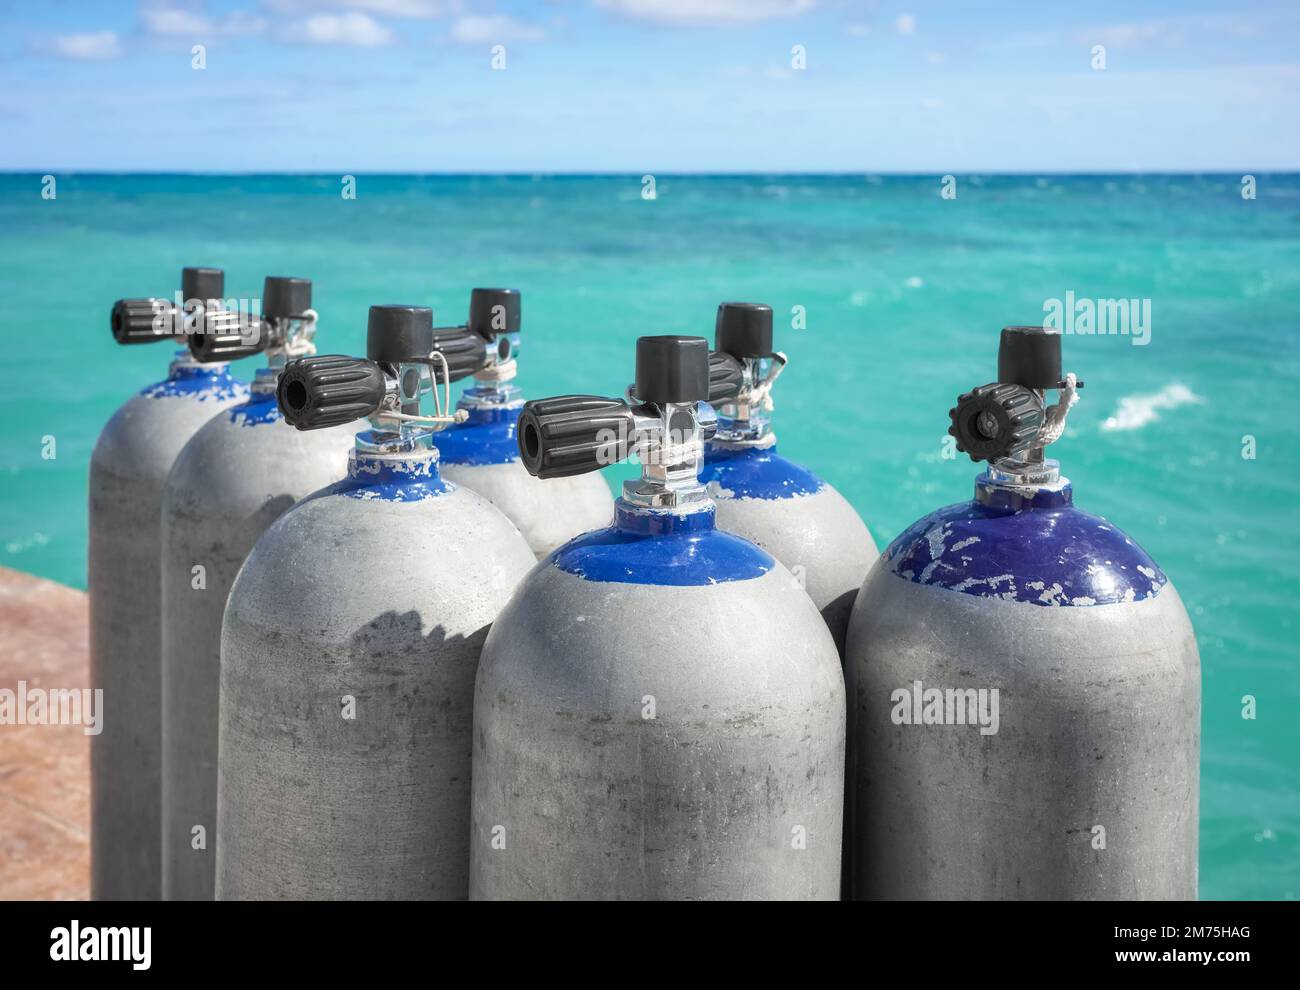 Close up picture of scuba tanks with turquoise water in the background, selective focus. Stock Photo